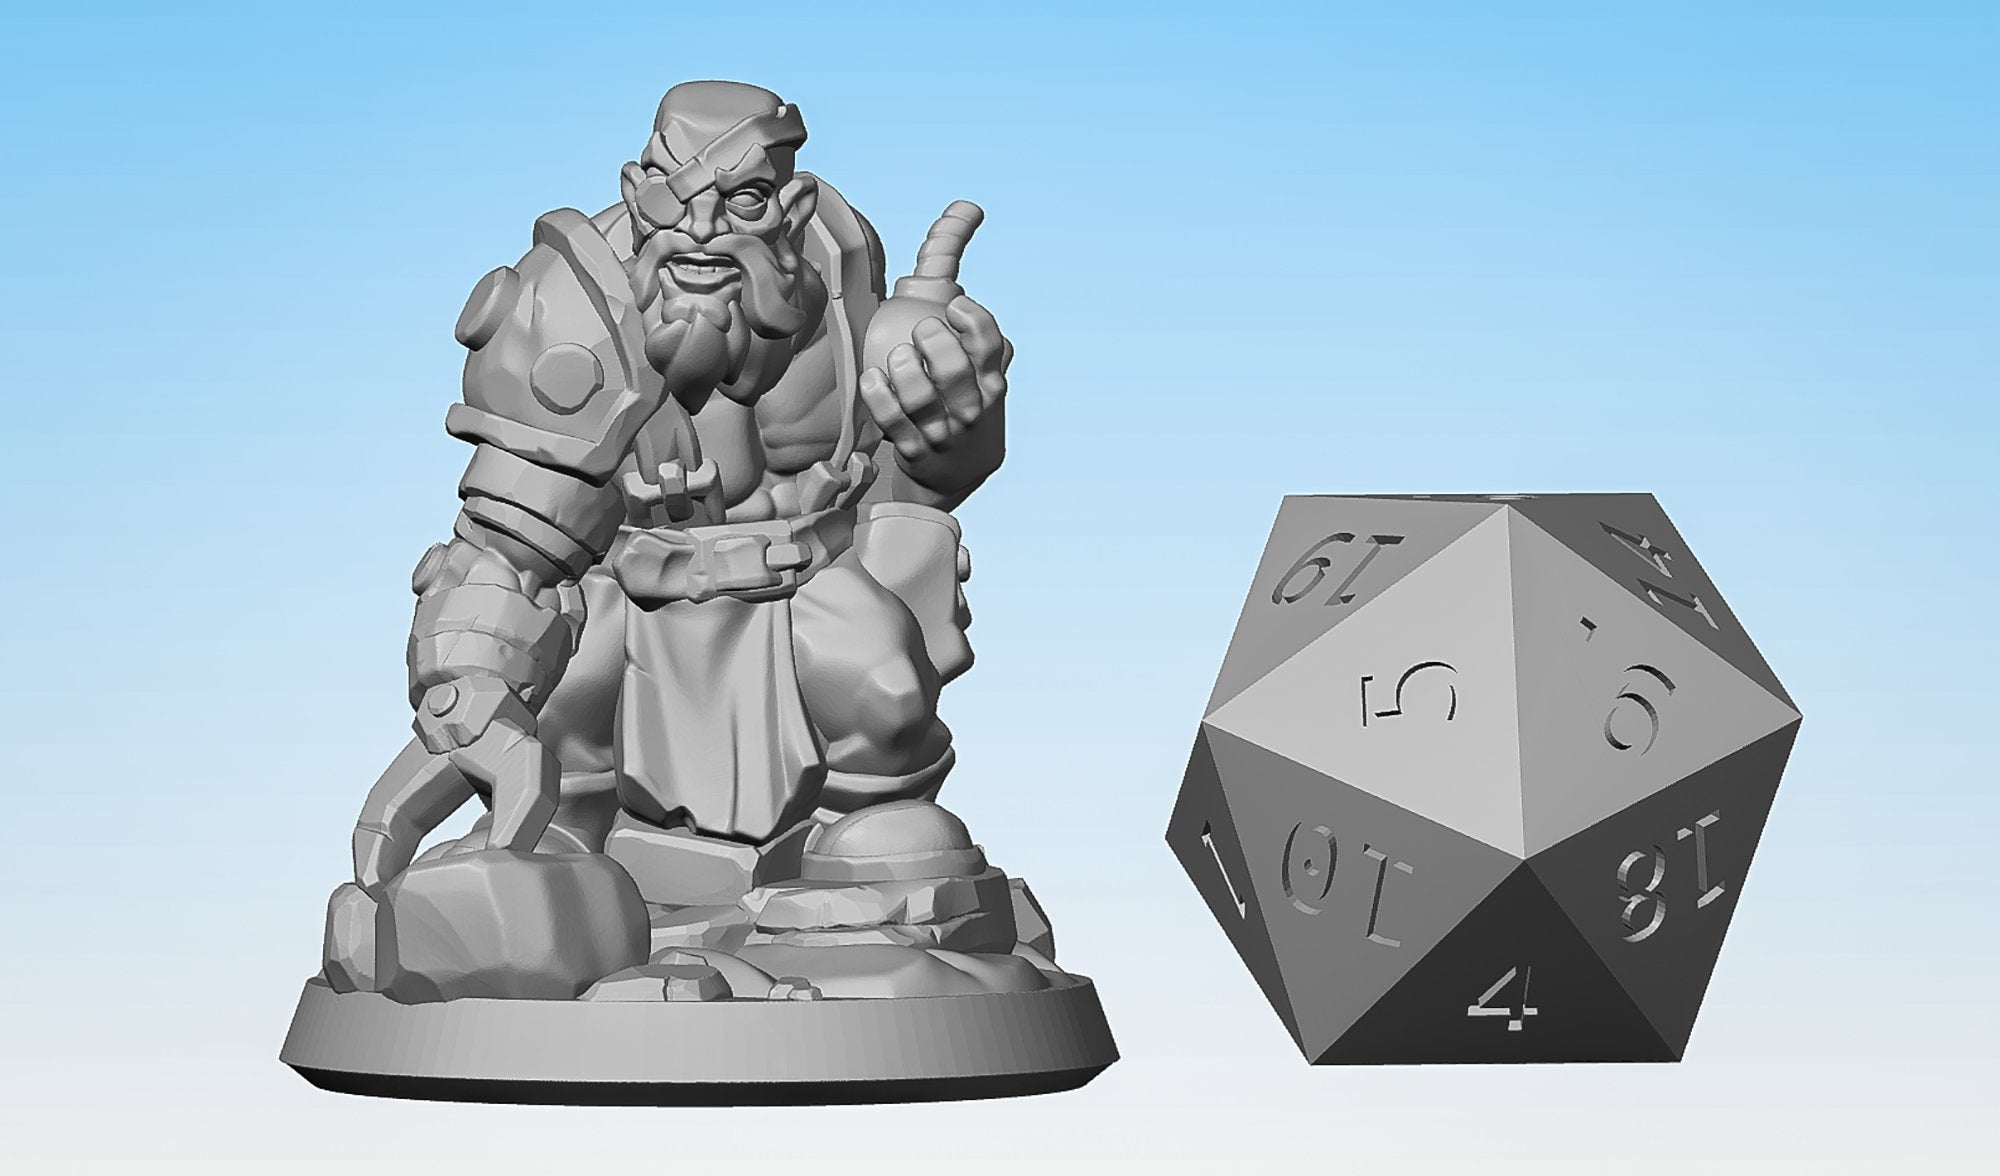 DWARF Artificer "Bionic bomber"-Role Playing Miniatures